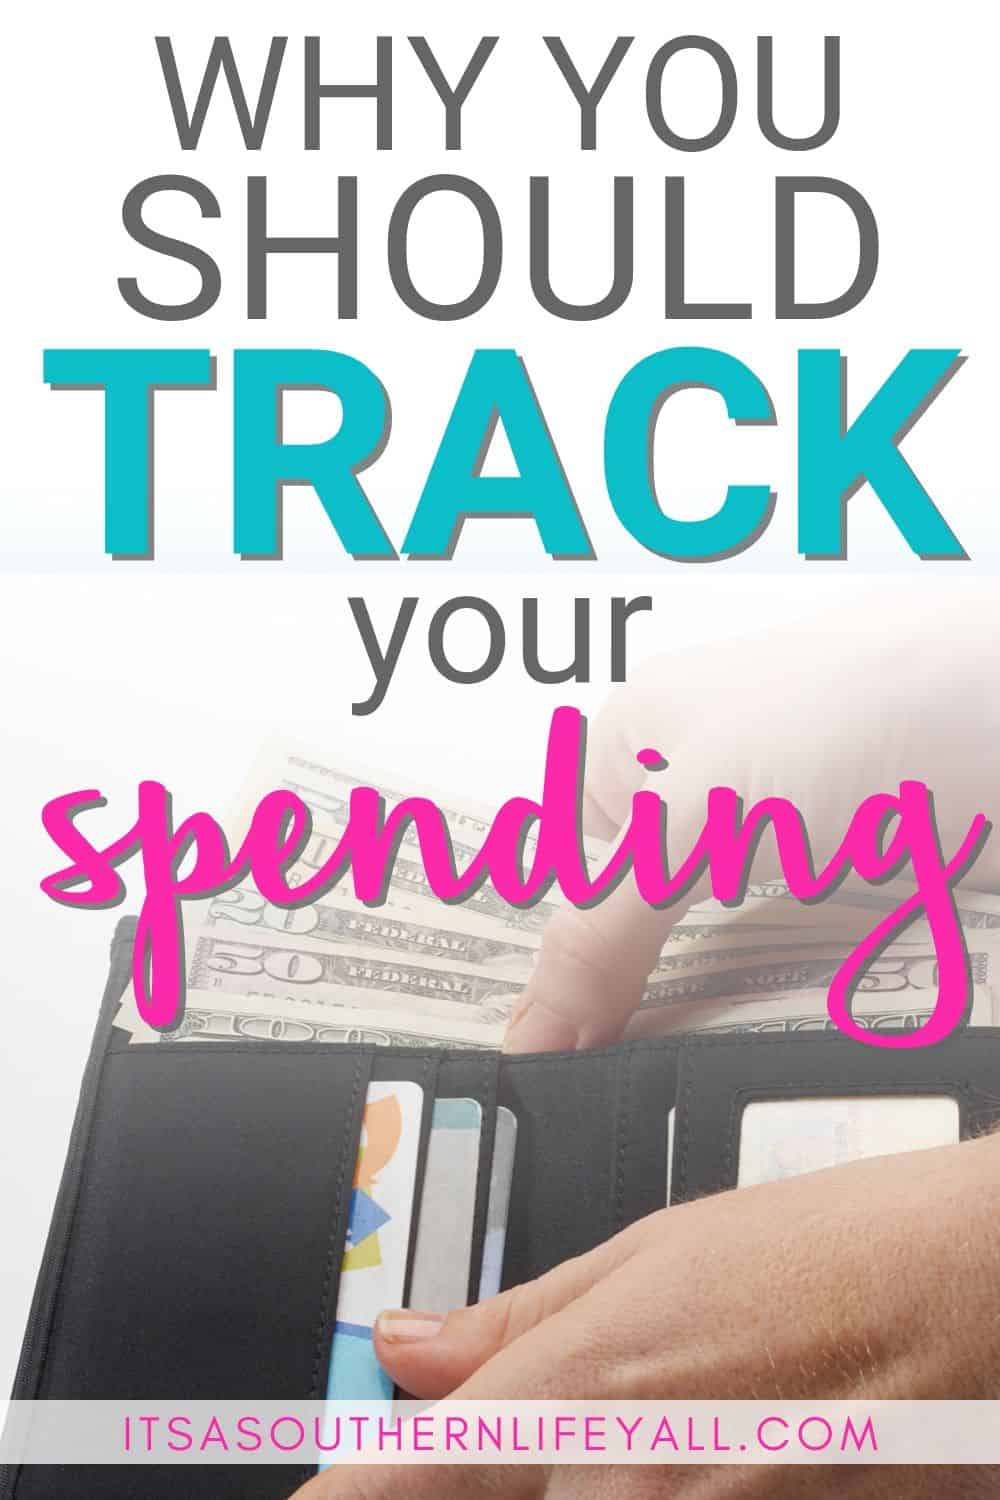 Why You Should Track Your Spending